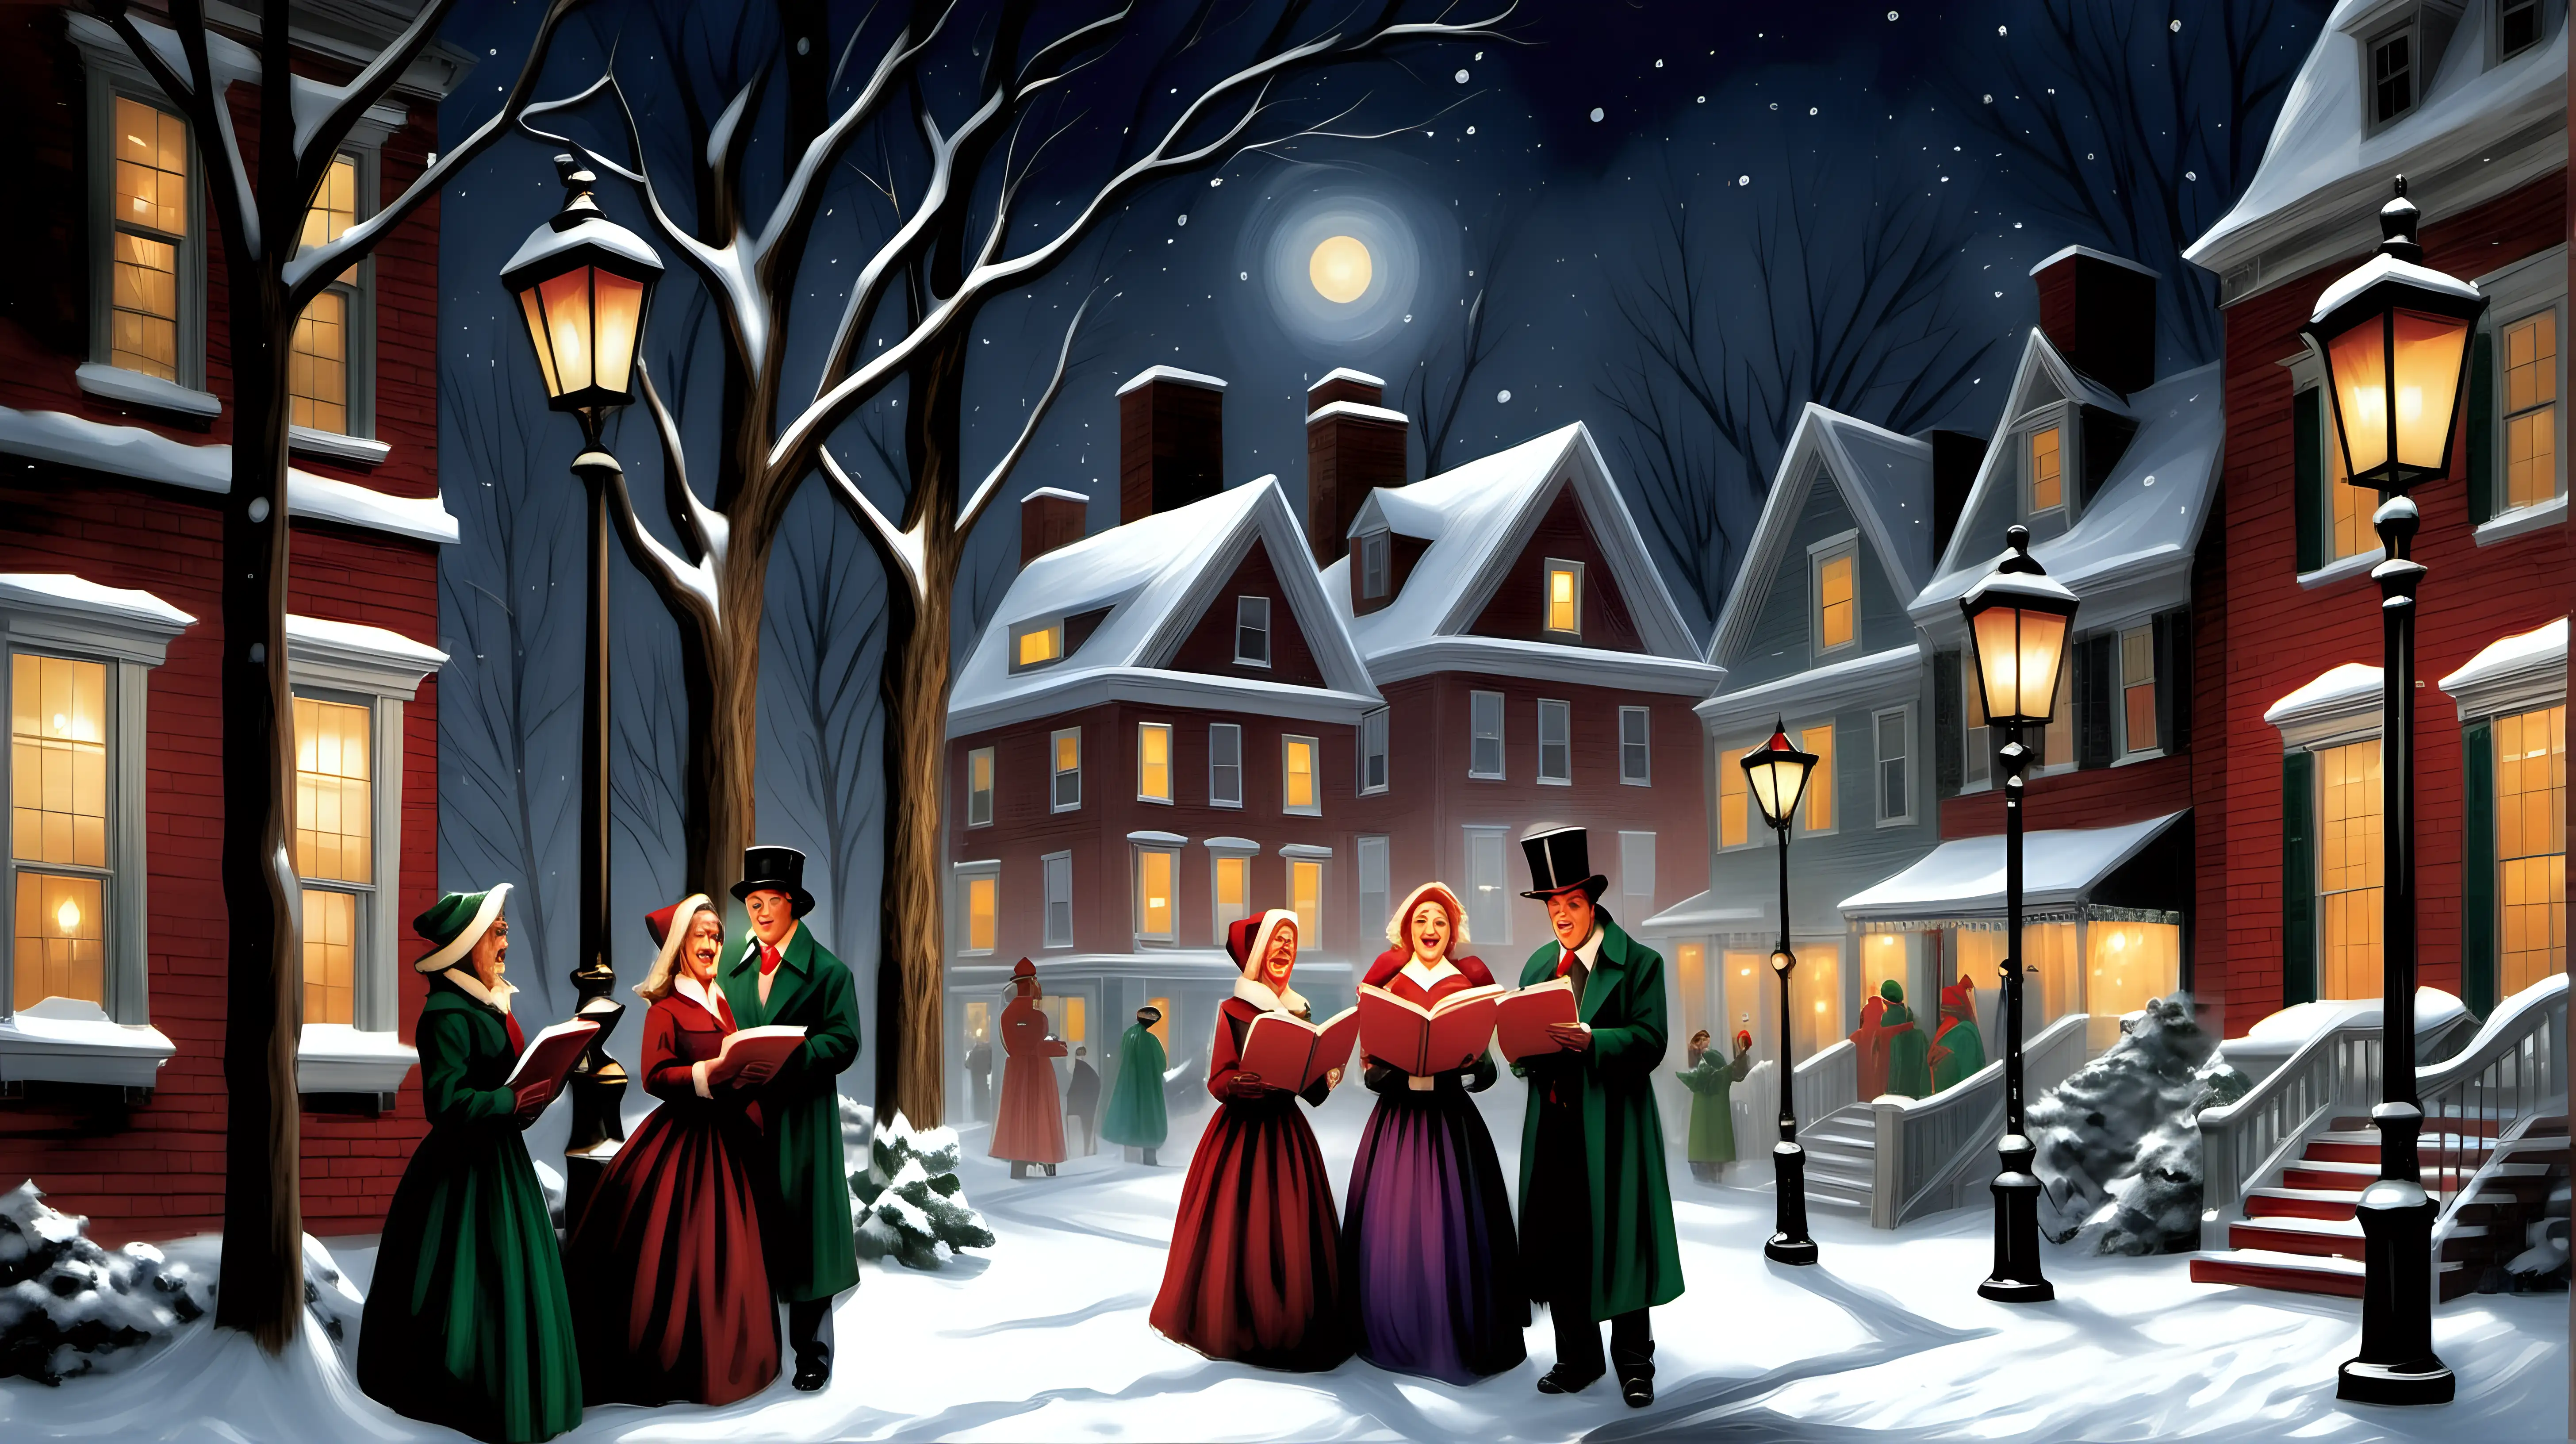 Charming Snowy Evening Carolers Singing under Lampposts